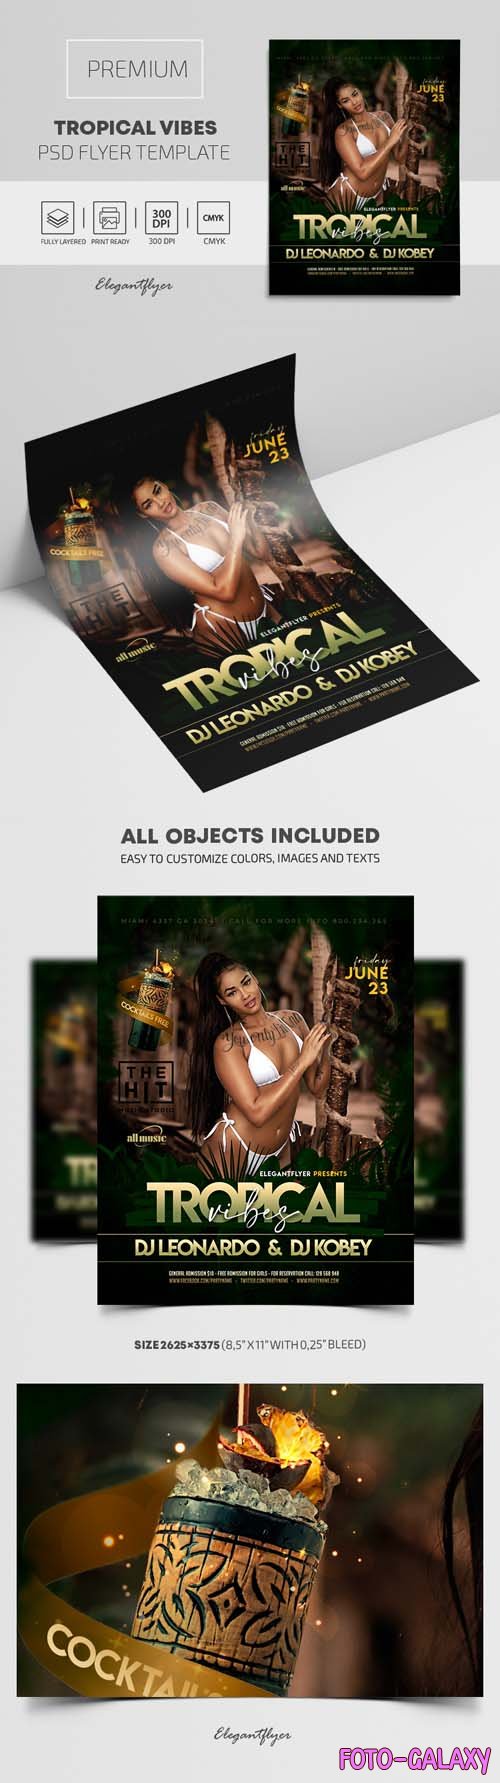 Tropical Vibes Premium PSD Flyer Template